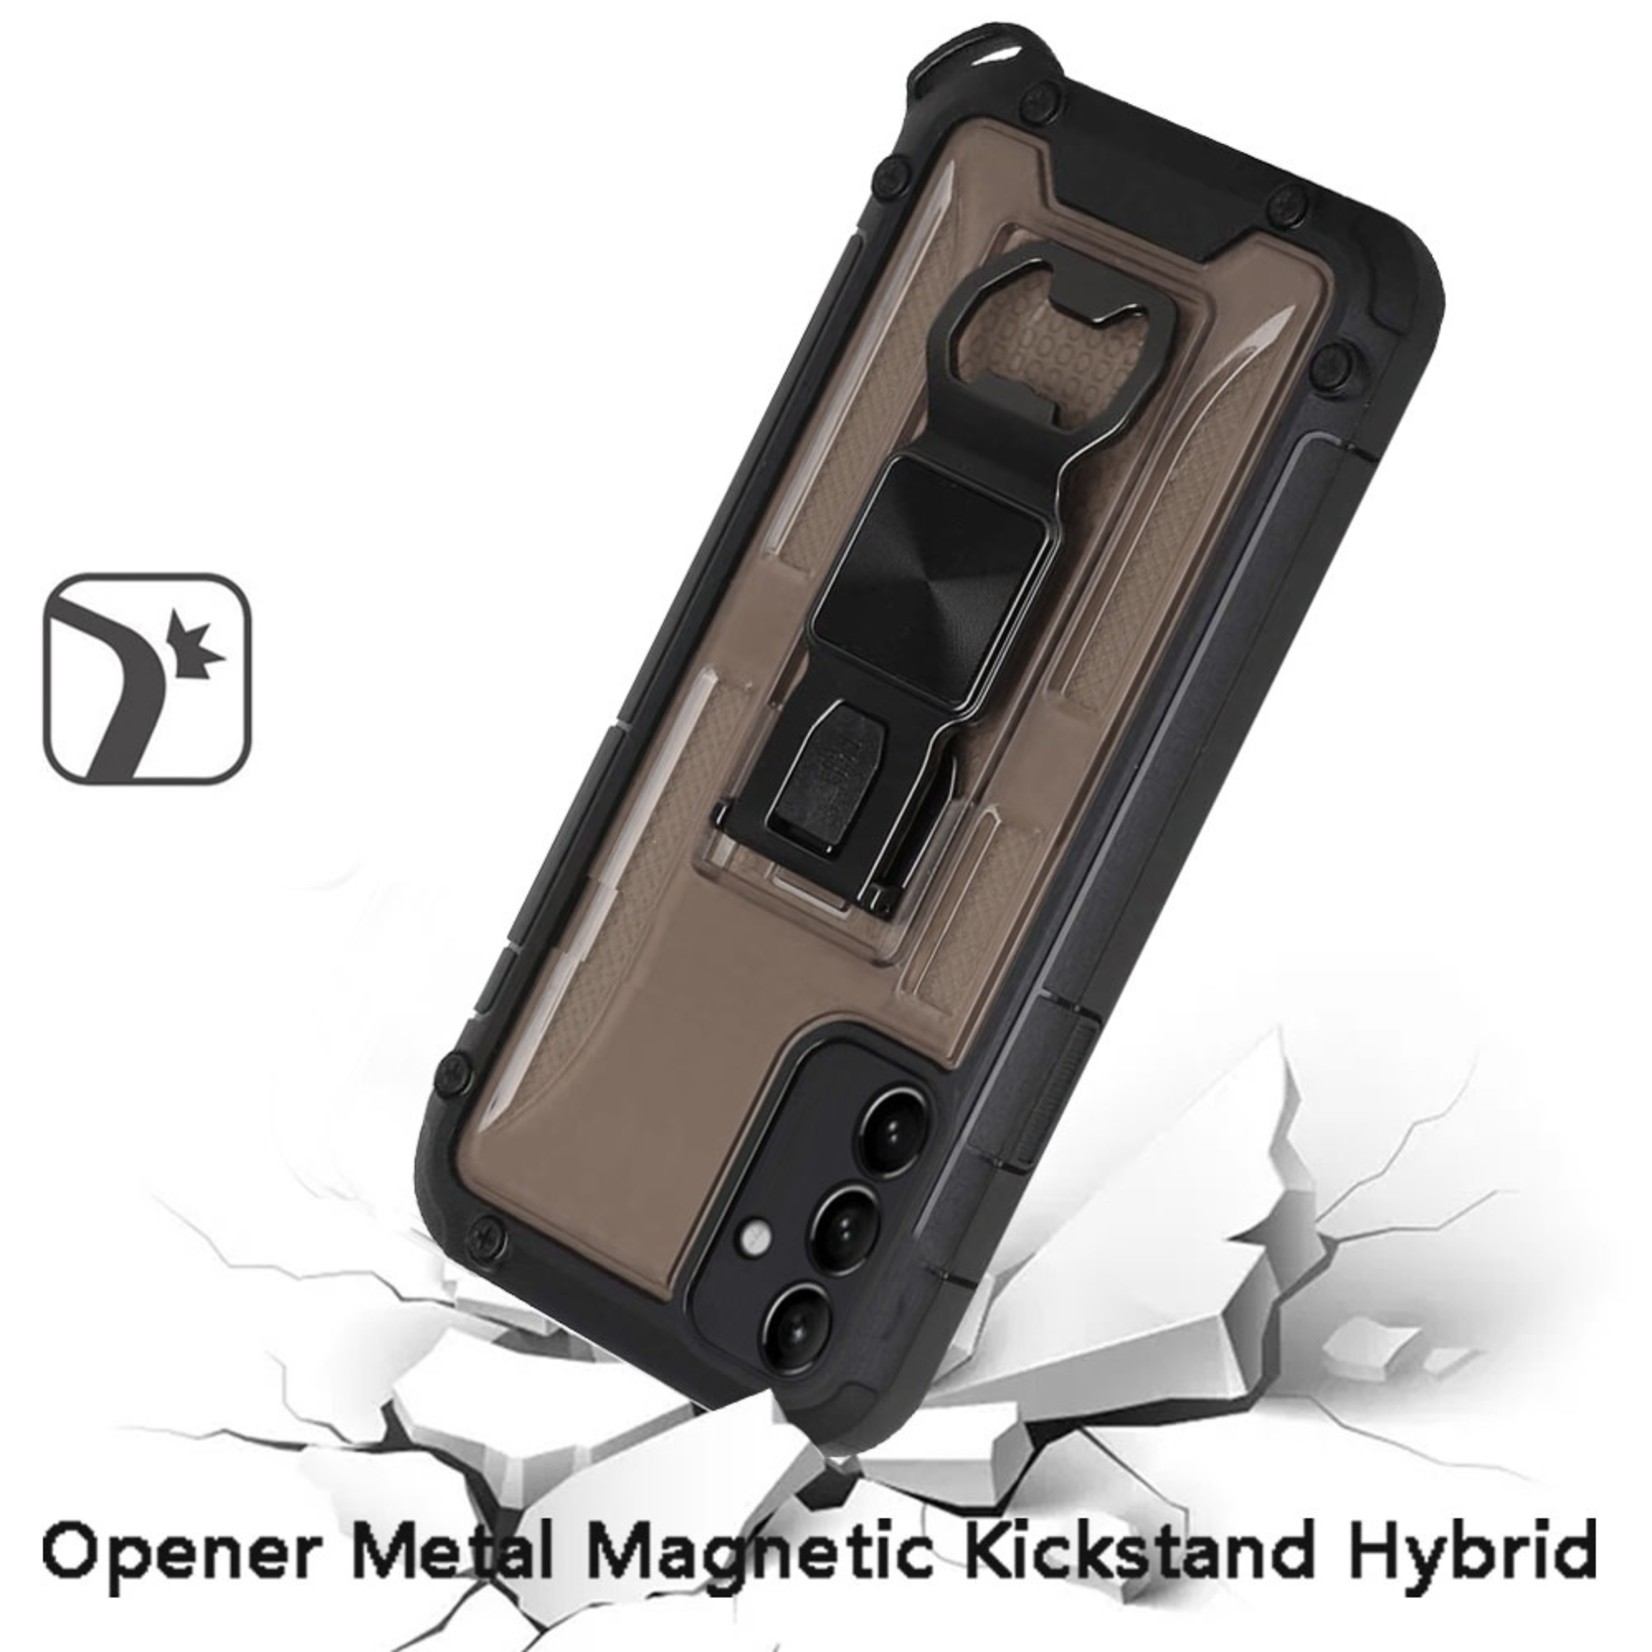 Samsung Opener Metal Magnetic Kickstand Hybrid Case Cover - Black For Samsung Galaxy A13 5G